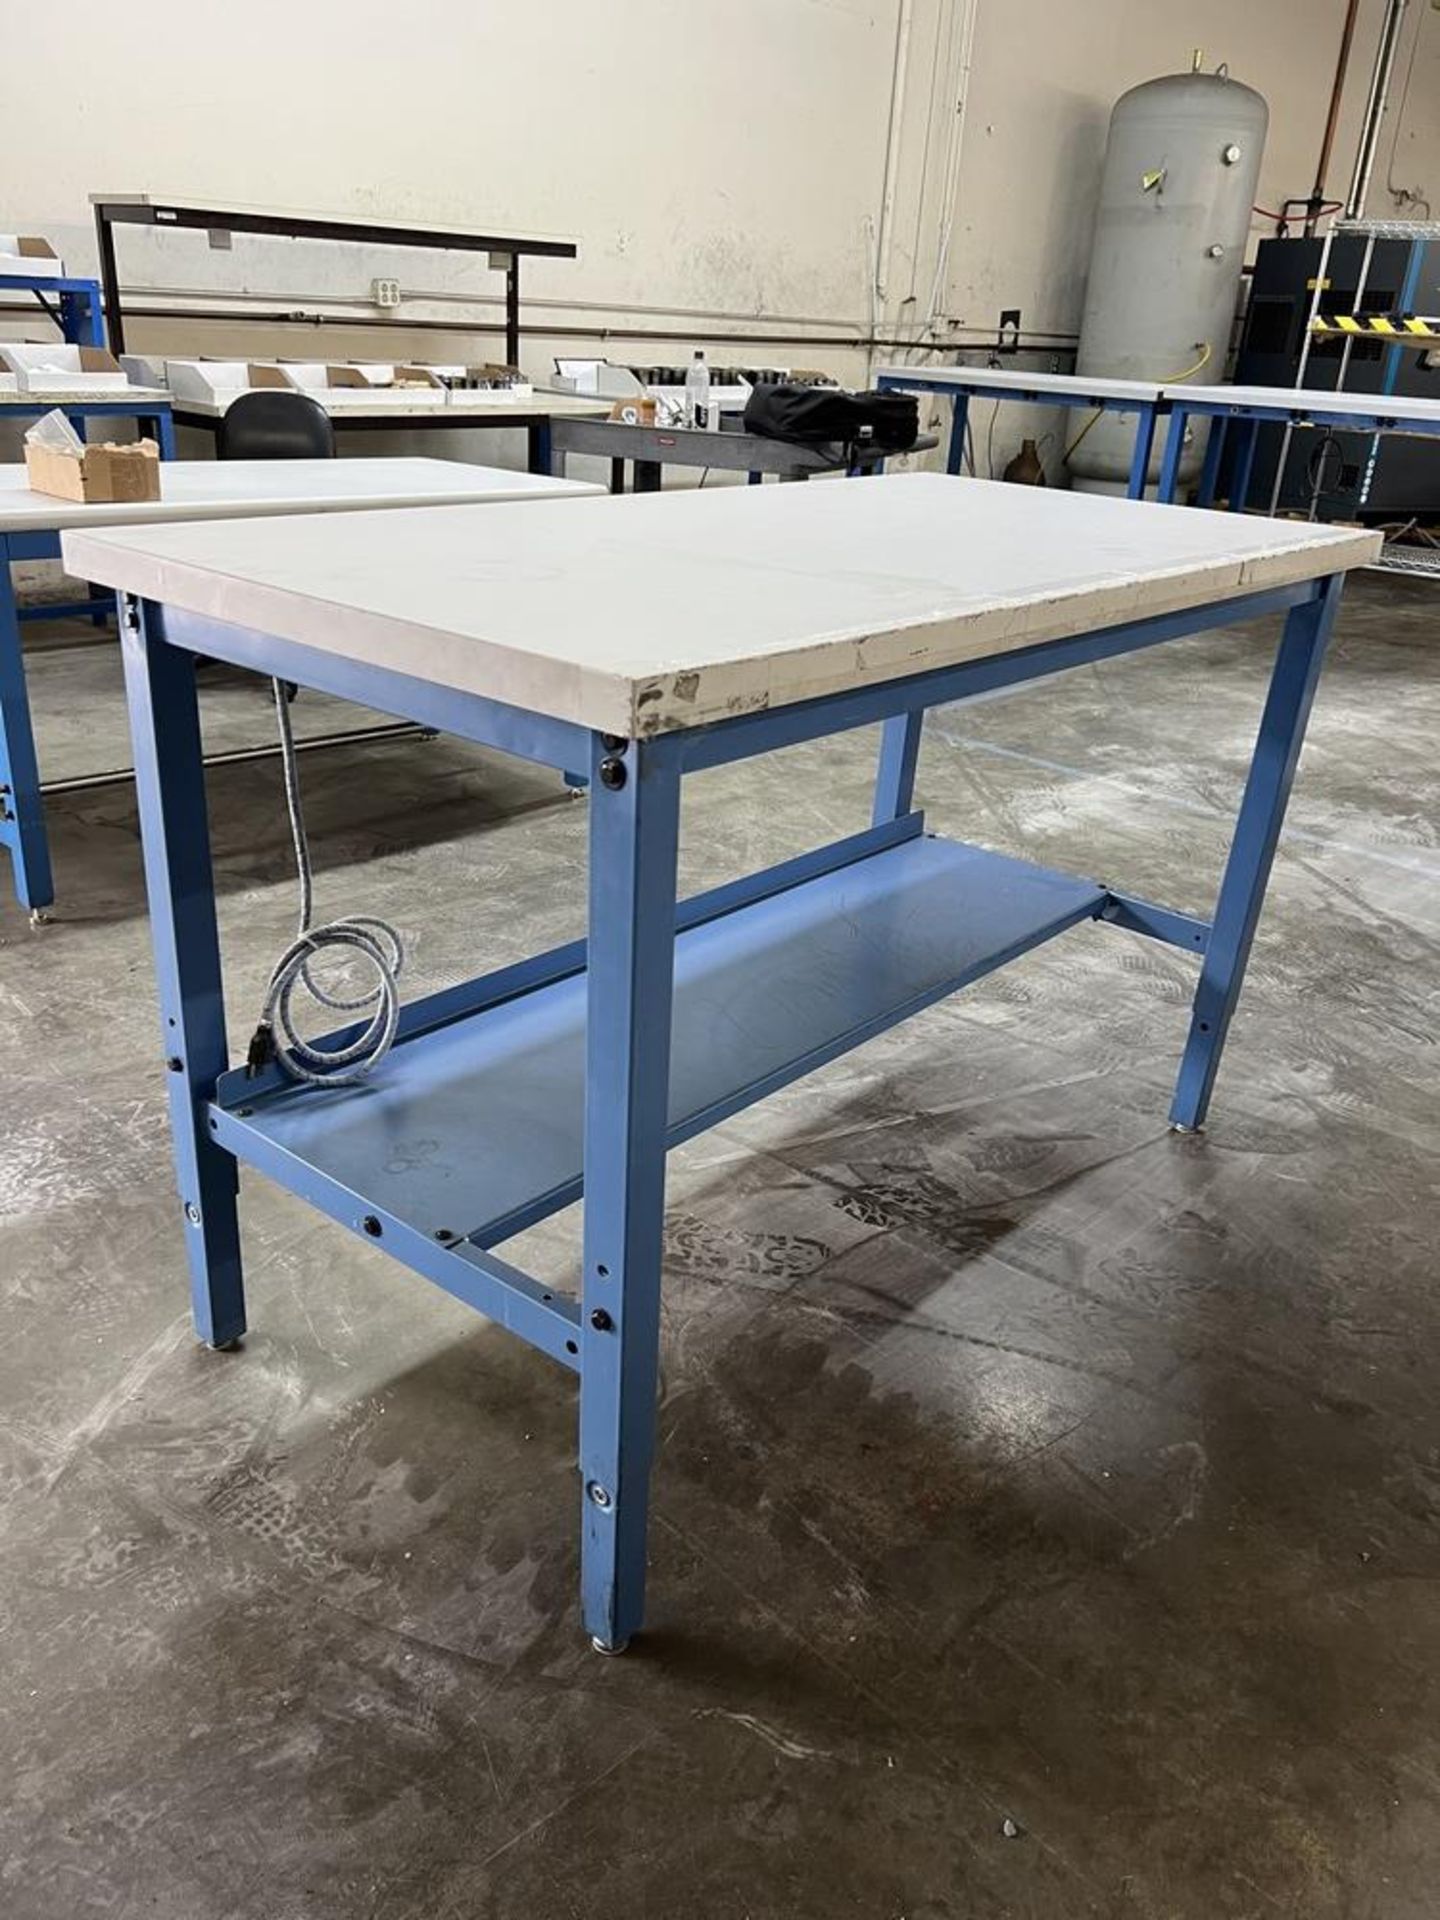 Global Industrial Adjustable Work Table With Power Strip 60" x 30" x 30" - Image 2 of 5